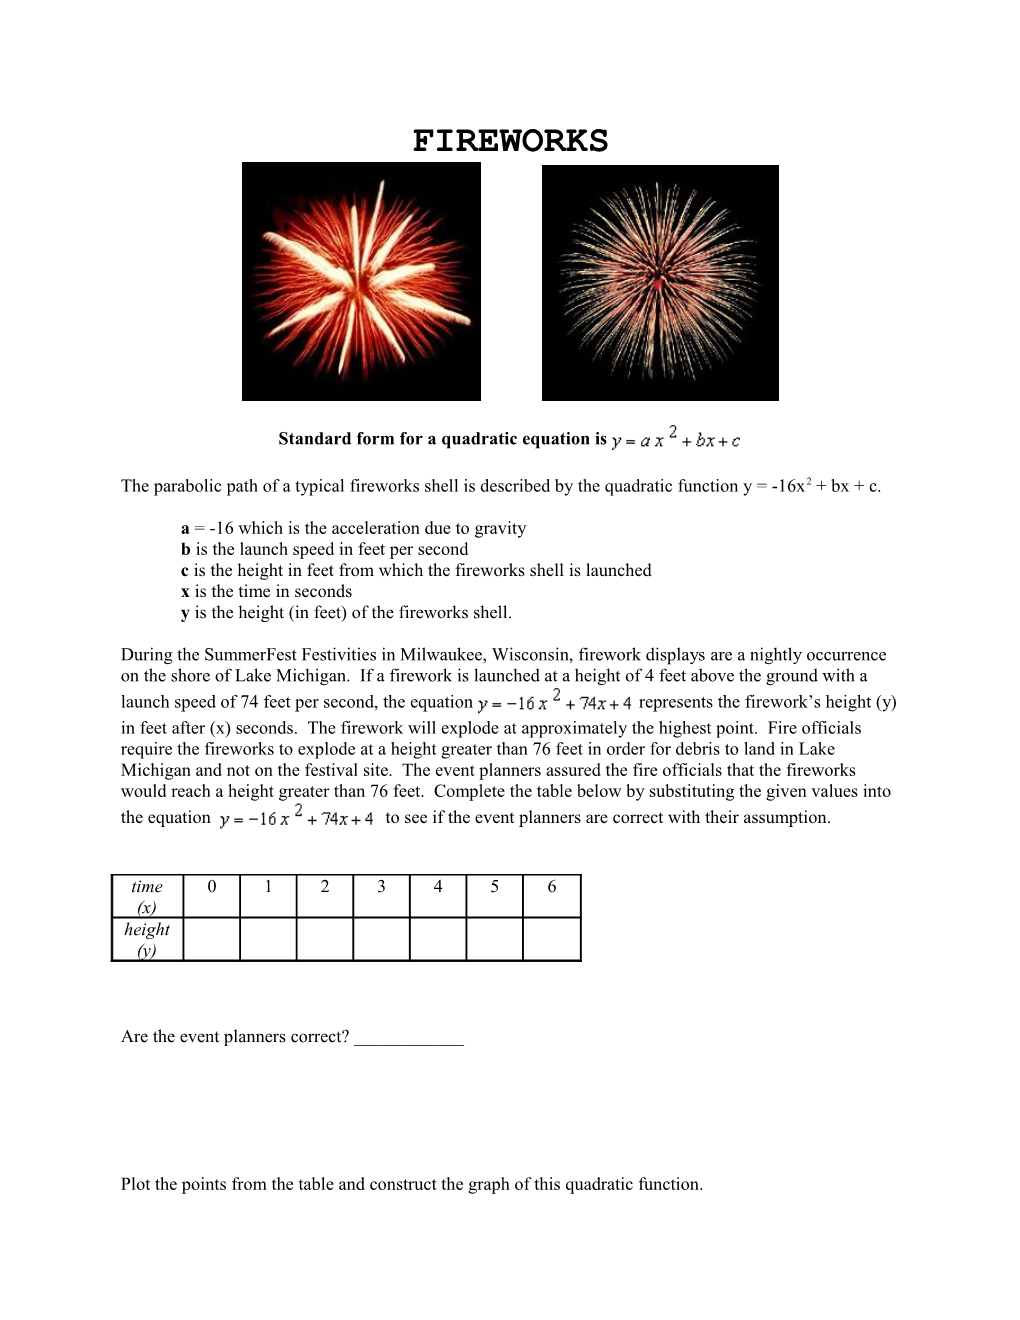 The Parabolic Path of a Typical Fireworks Shell Is Described by the Quadratic Function